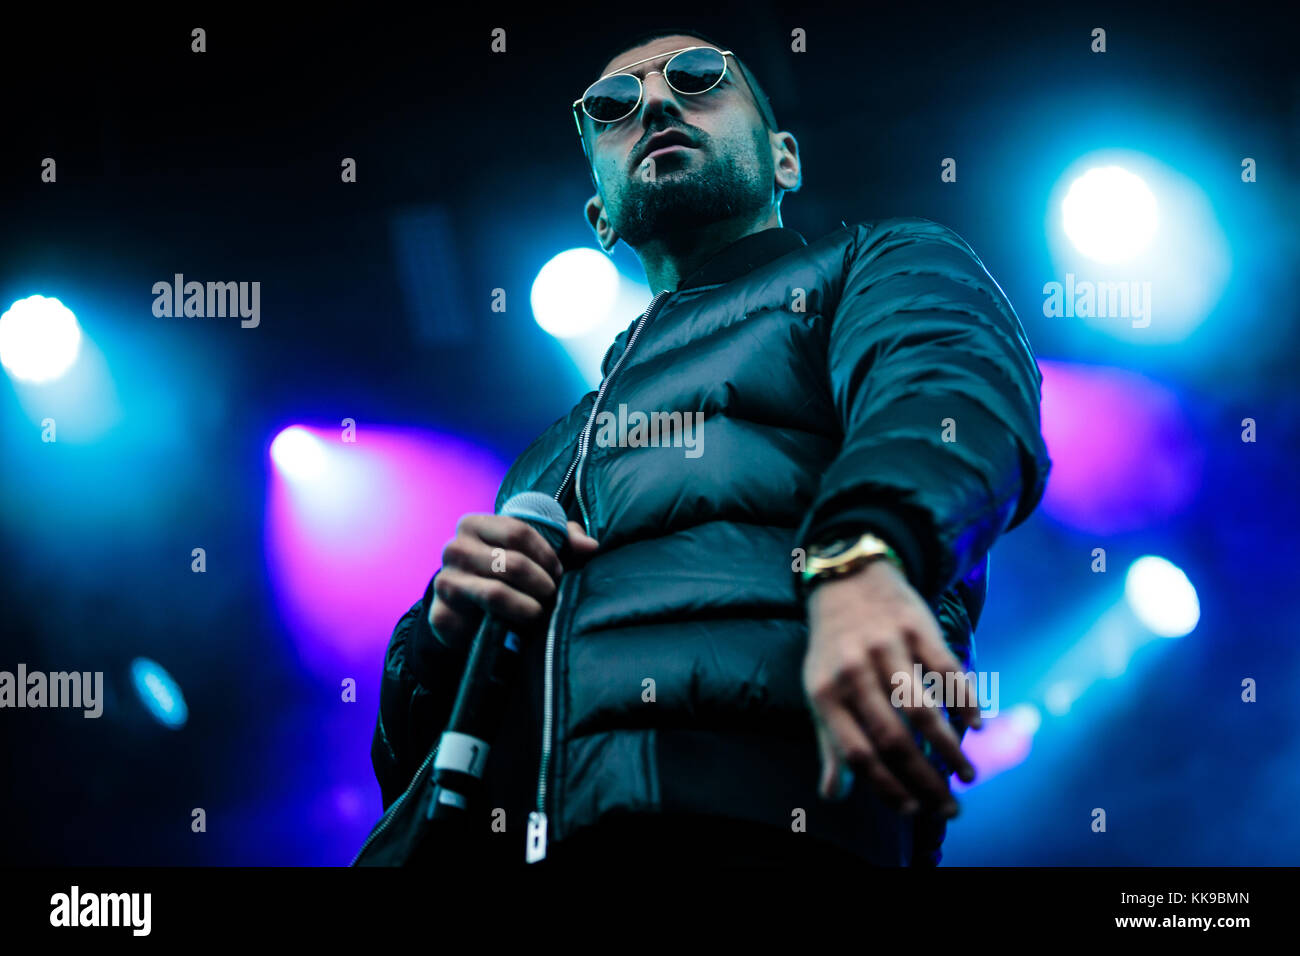 The Danish rapper Sivas (Stylized S!vas) performs a live concert at Bastionen in Bergen. Sivas has an Iranian background and mess up the Danish dictionary combining Danish, English and Arabian in one big ghetto mixture. Norway, 28/08 2015. Stock Photo